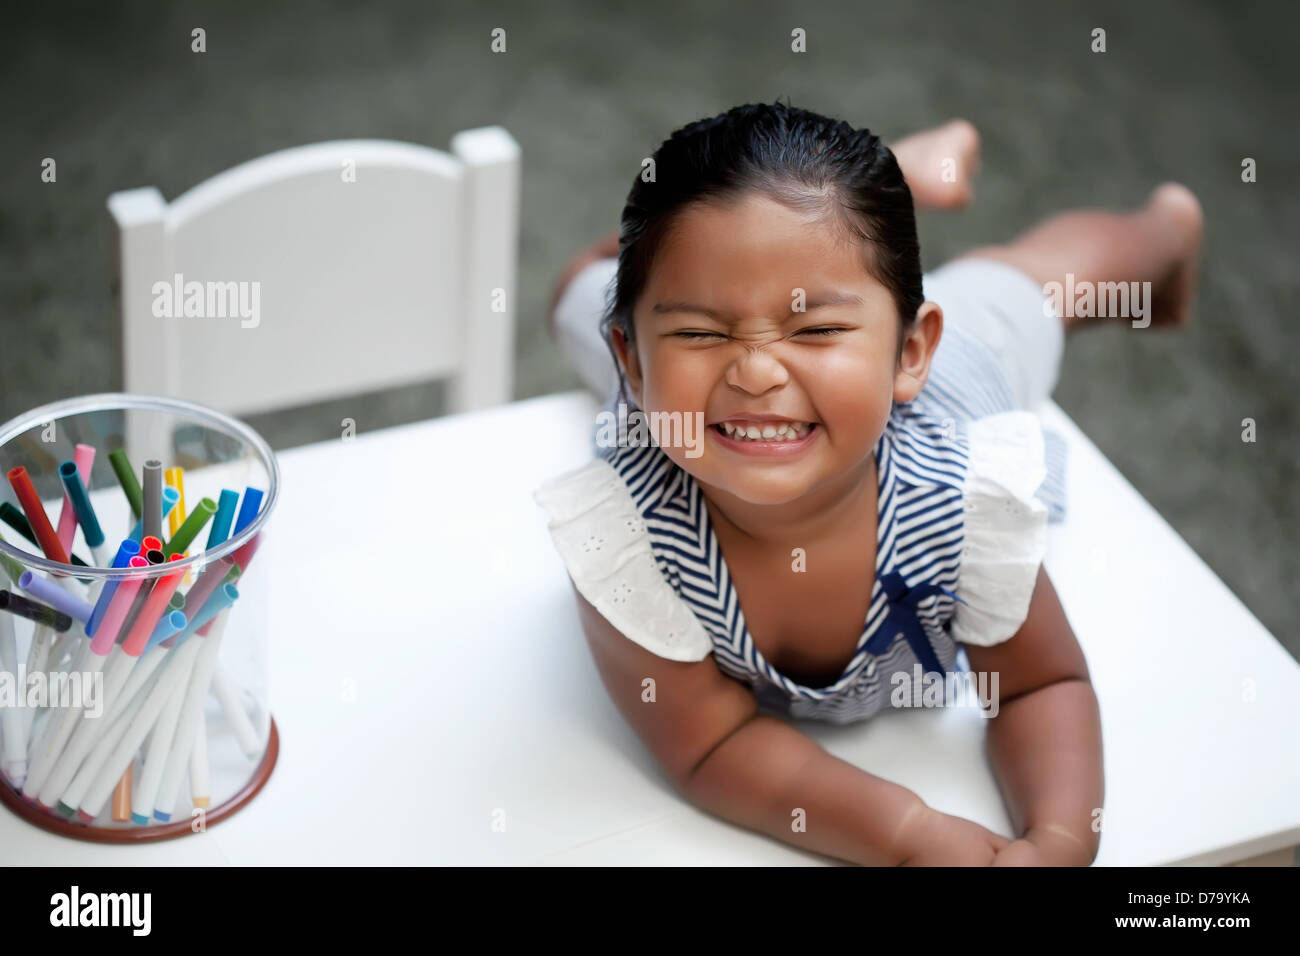 Little girl with cute smile laying on top of a white kiddie table with colorful markers Stock Photo